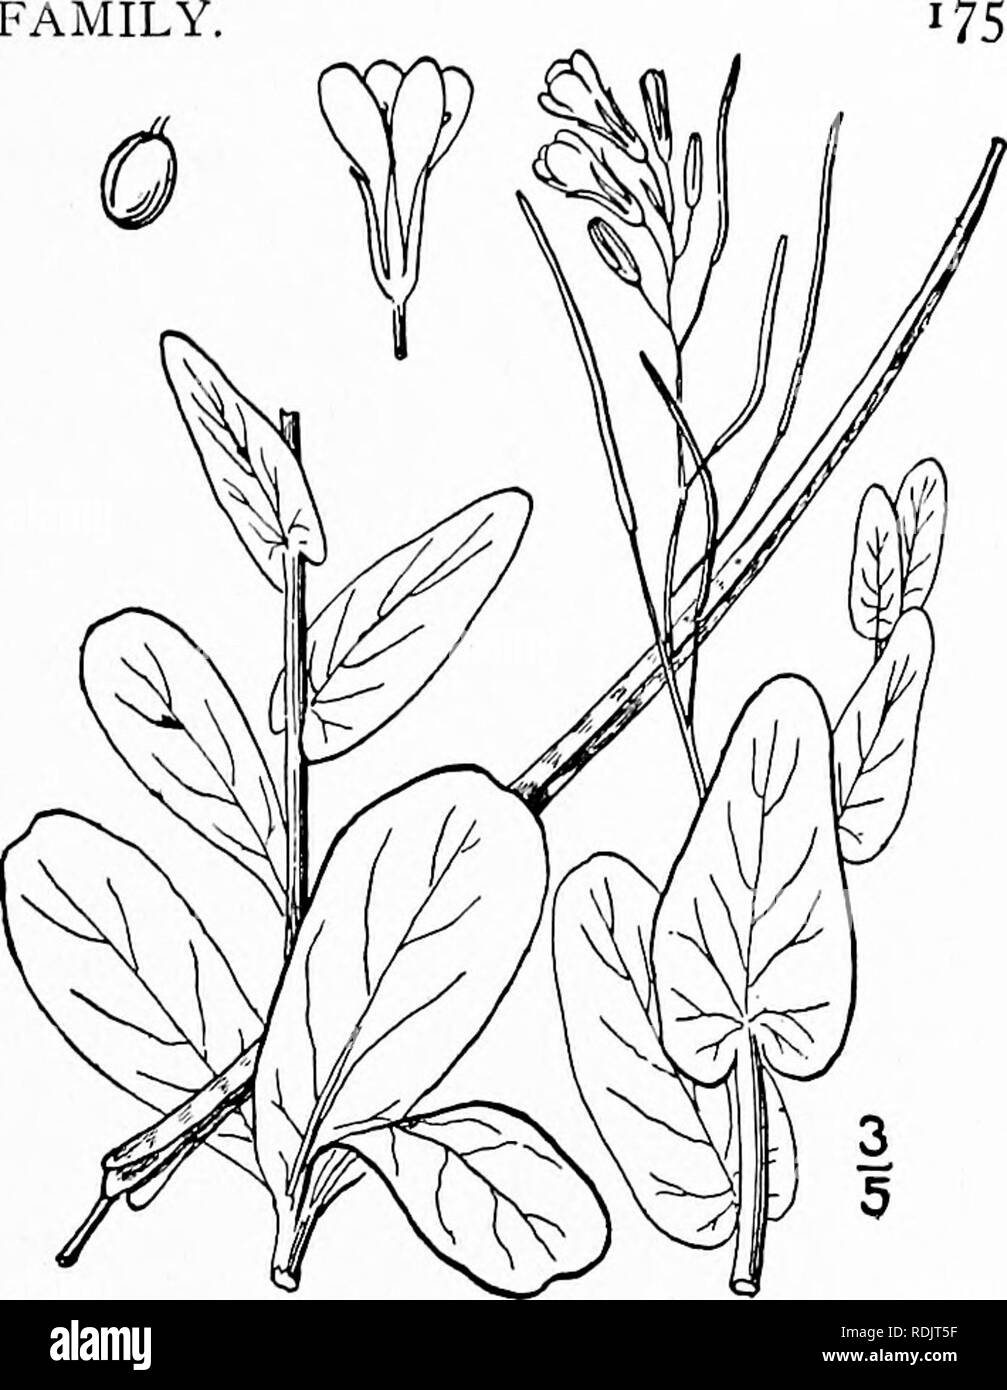 . An illustrated flora of the northern United States, Canada and the British possessions, from Newfoundland to the parallel of the southern boundary of Virginia, and from the Atlantic Ocean westward to the 102d meridian. Botany; Botany. Genus 28 MUSTARD FAMILY I. Conringia orientalis (L.) Dumort. Hare's-ear, Treacle Mustard. Fig. 2061. Brassica orientalis L. Sp. PI. 666. 1753. E. perfoliatum Crantz, Stirp. Aust. i : 27, 1762. Brassica perfoliata Lam. Encycl. i : 748. 1783. Erysimum orientale R. Br. Hort. Kew. Ed. 2, 4: 117. 1812. Conringia perfoliata Link, Enum. 2: 172. 1822. C. orientalis Dum Stock Photo